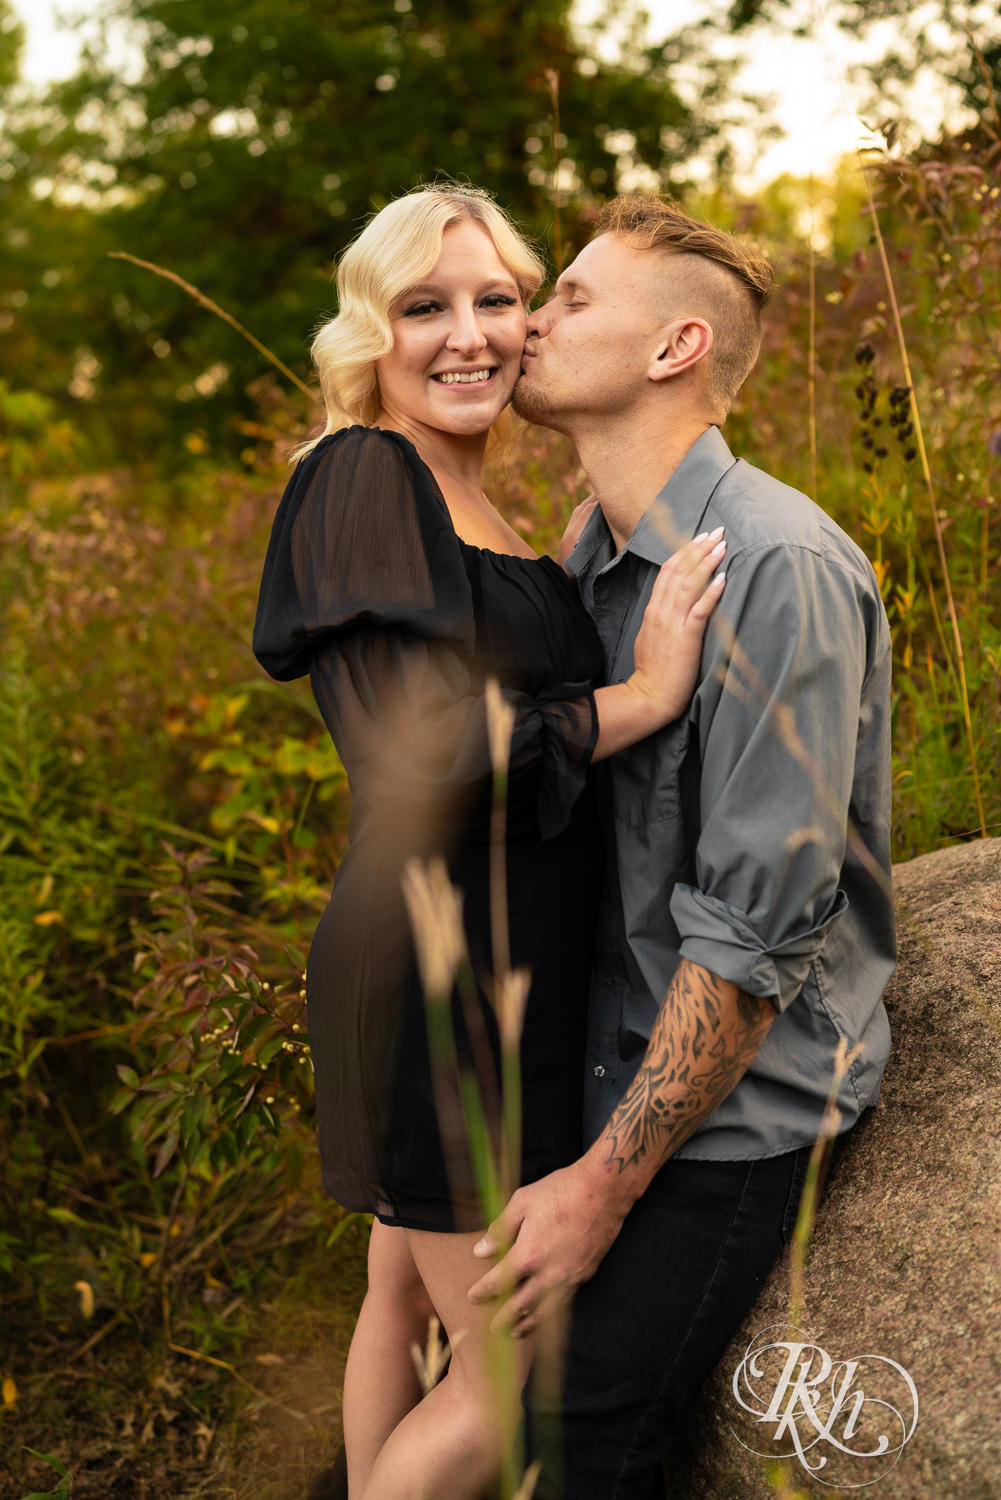 Blond woman in black dress and man in dress shirt kiss during sunset engagement photos at Lebanon Hills Regional Park in Eagan, Minnesota.